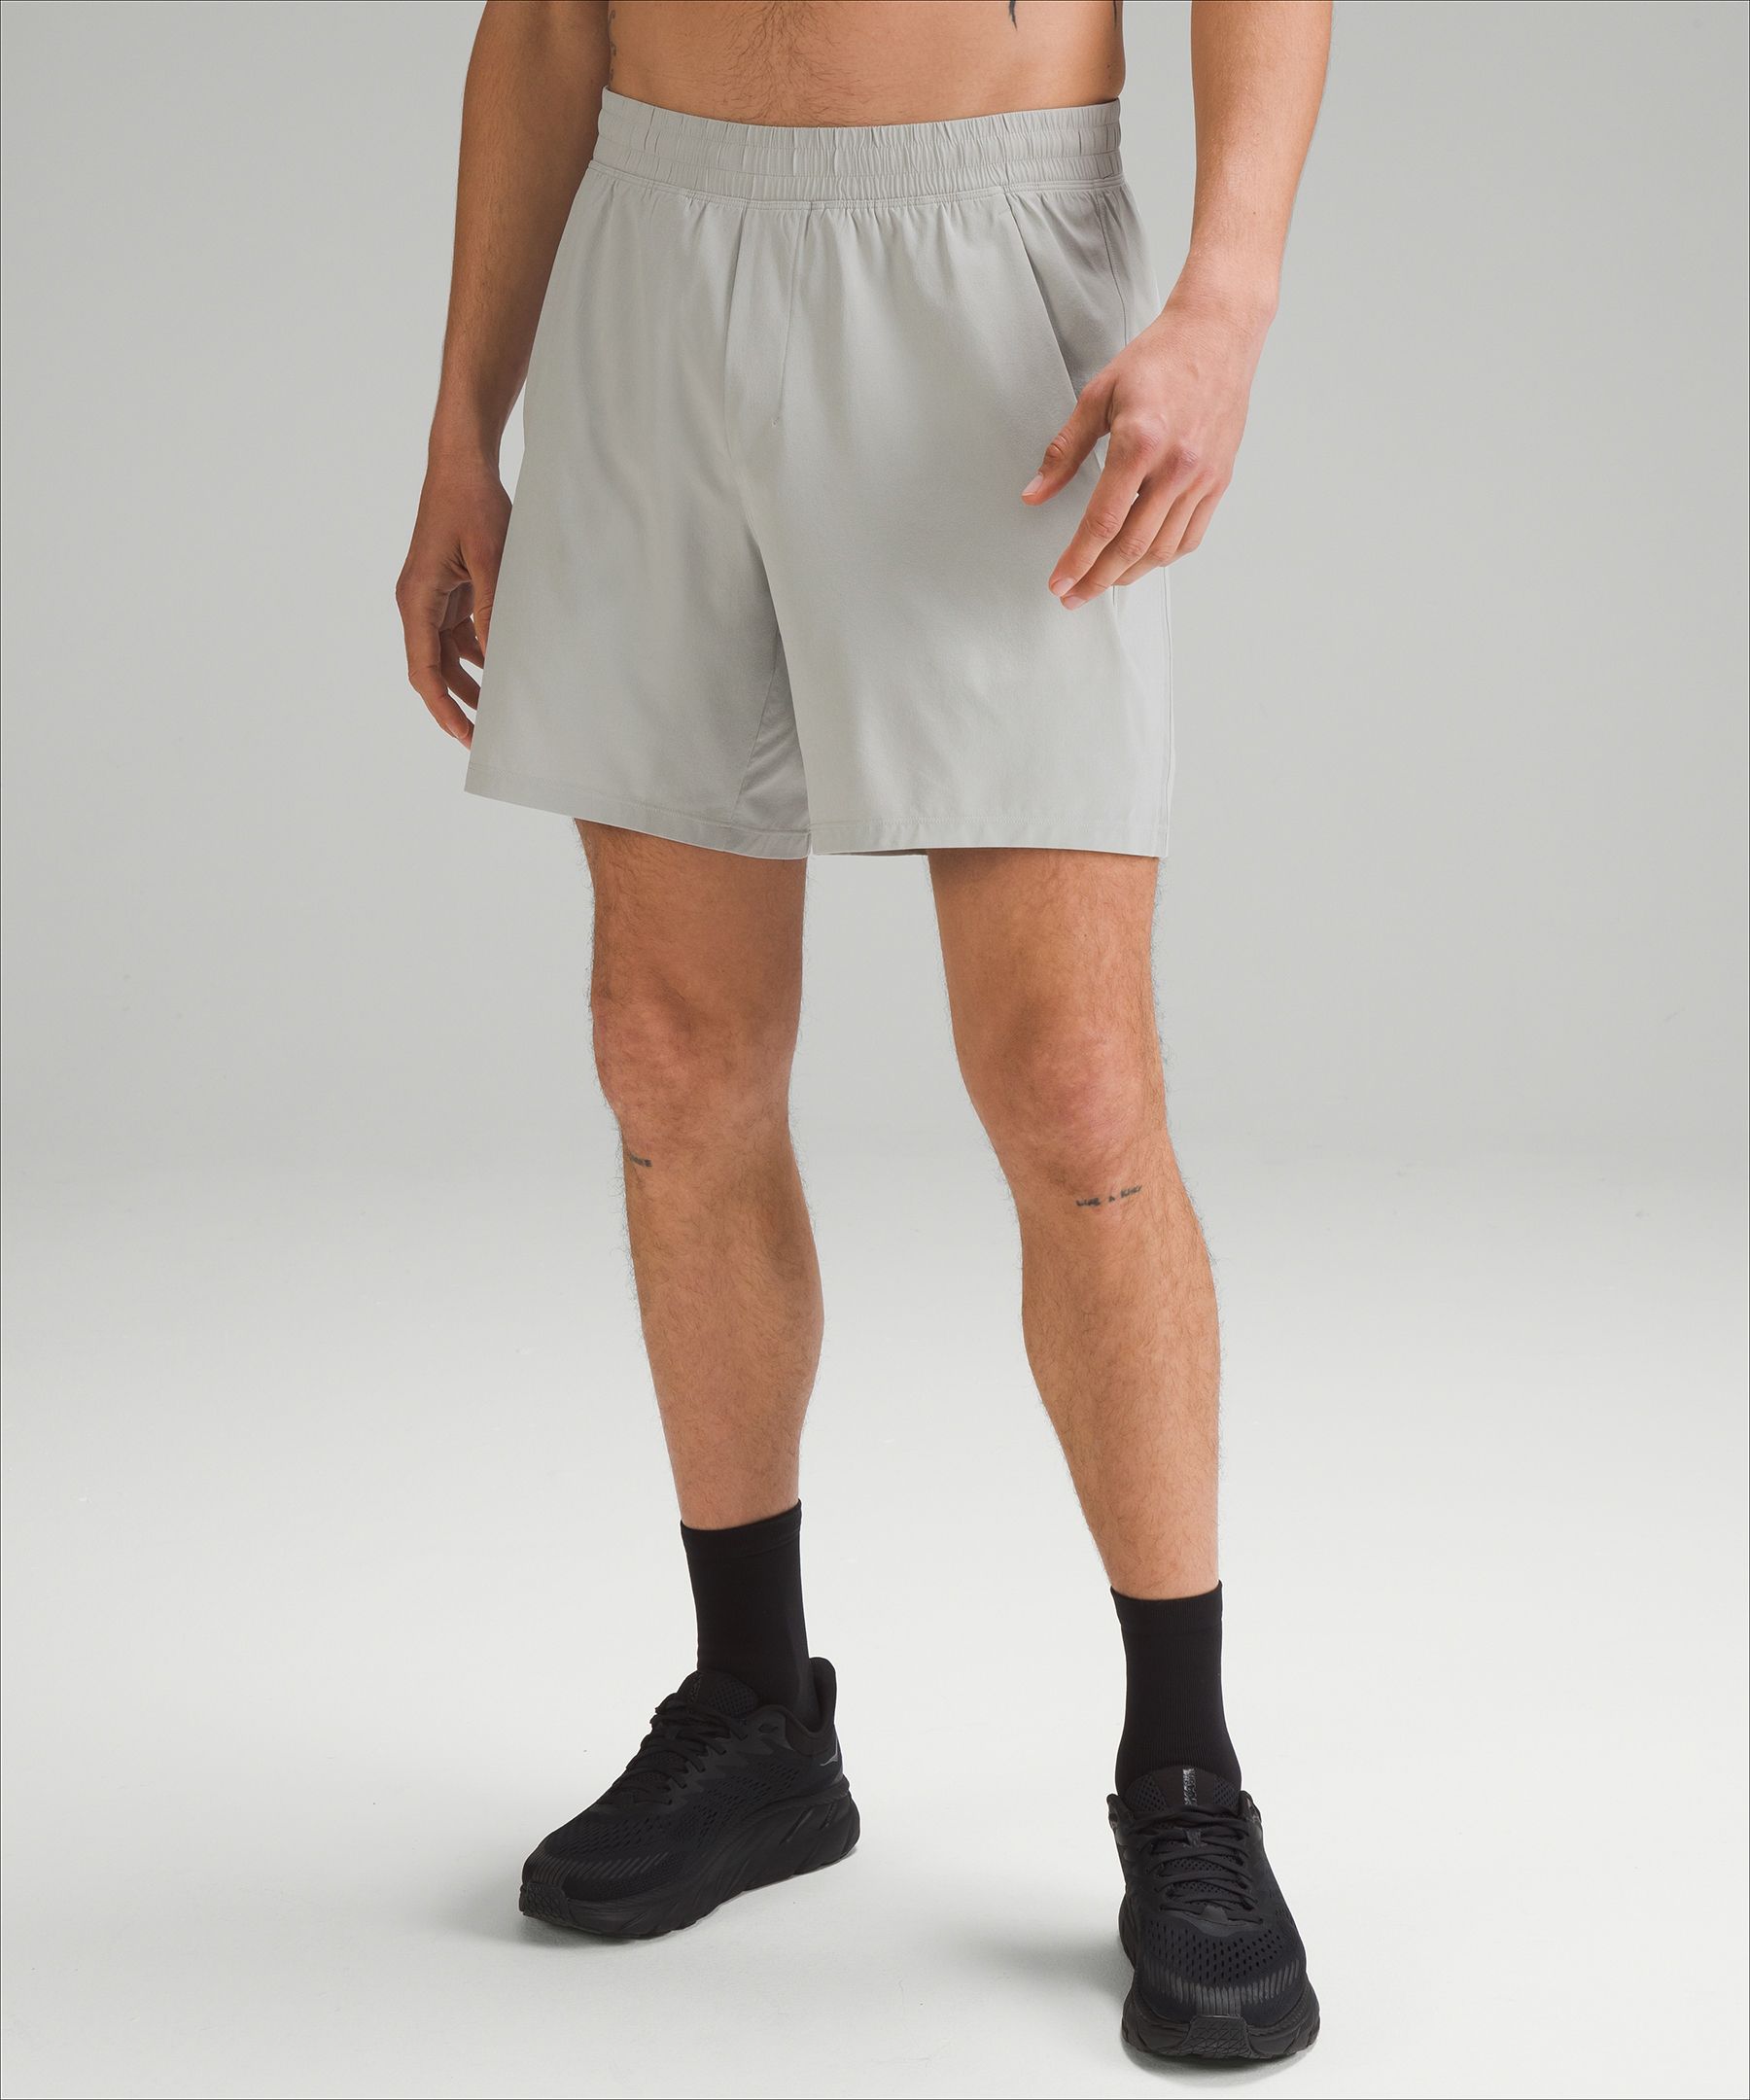 Lululemon's Pace Breaker Lined Shorts Are Up to 50% Off - Men's